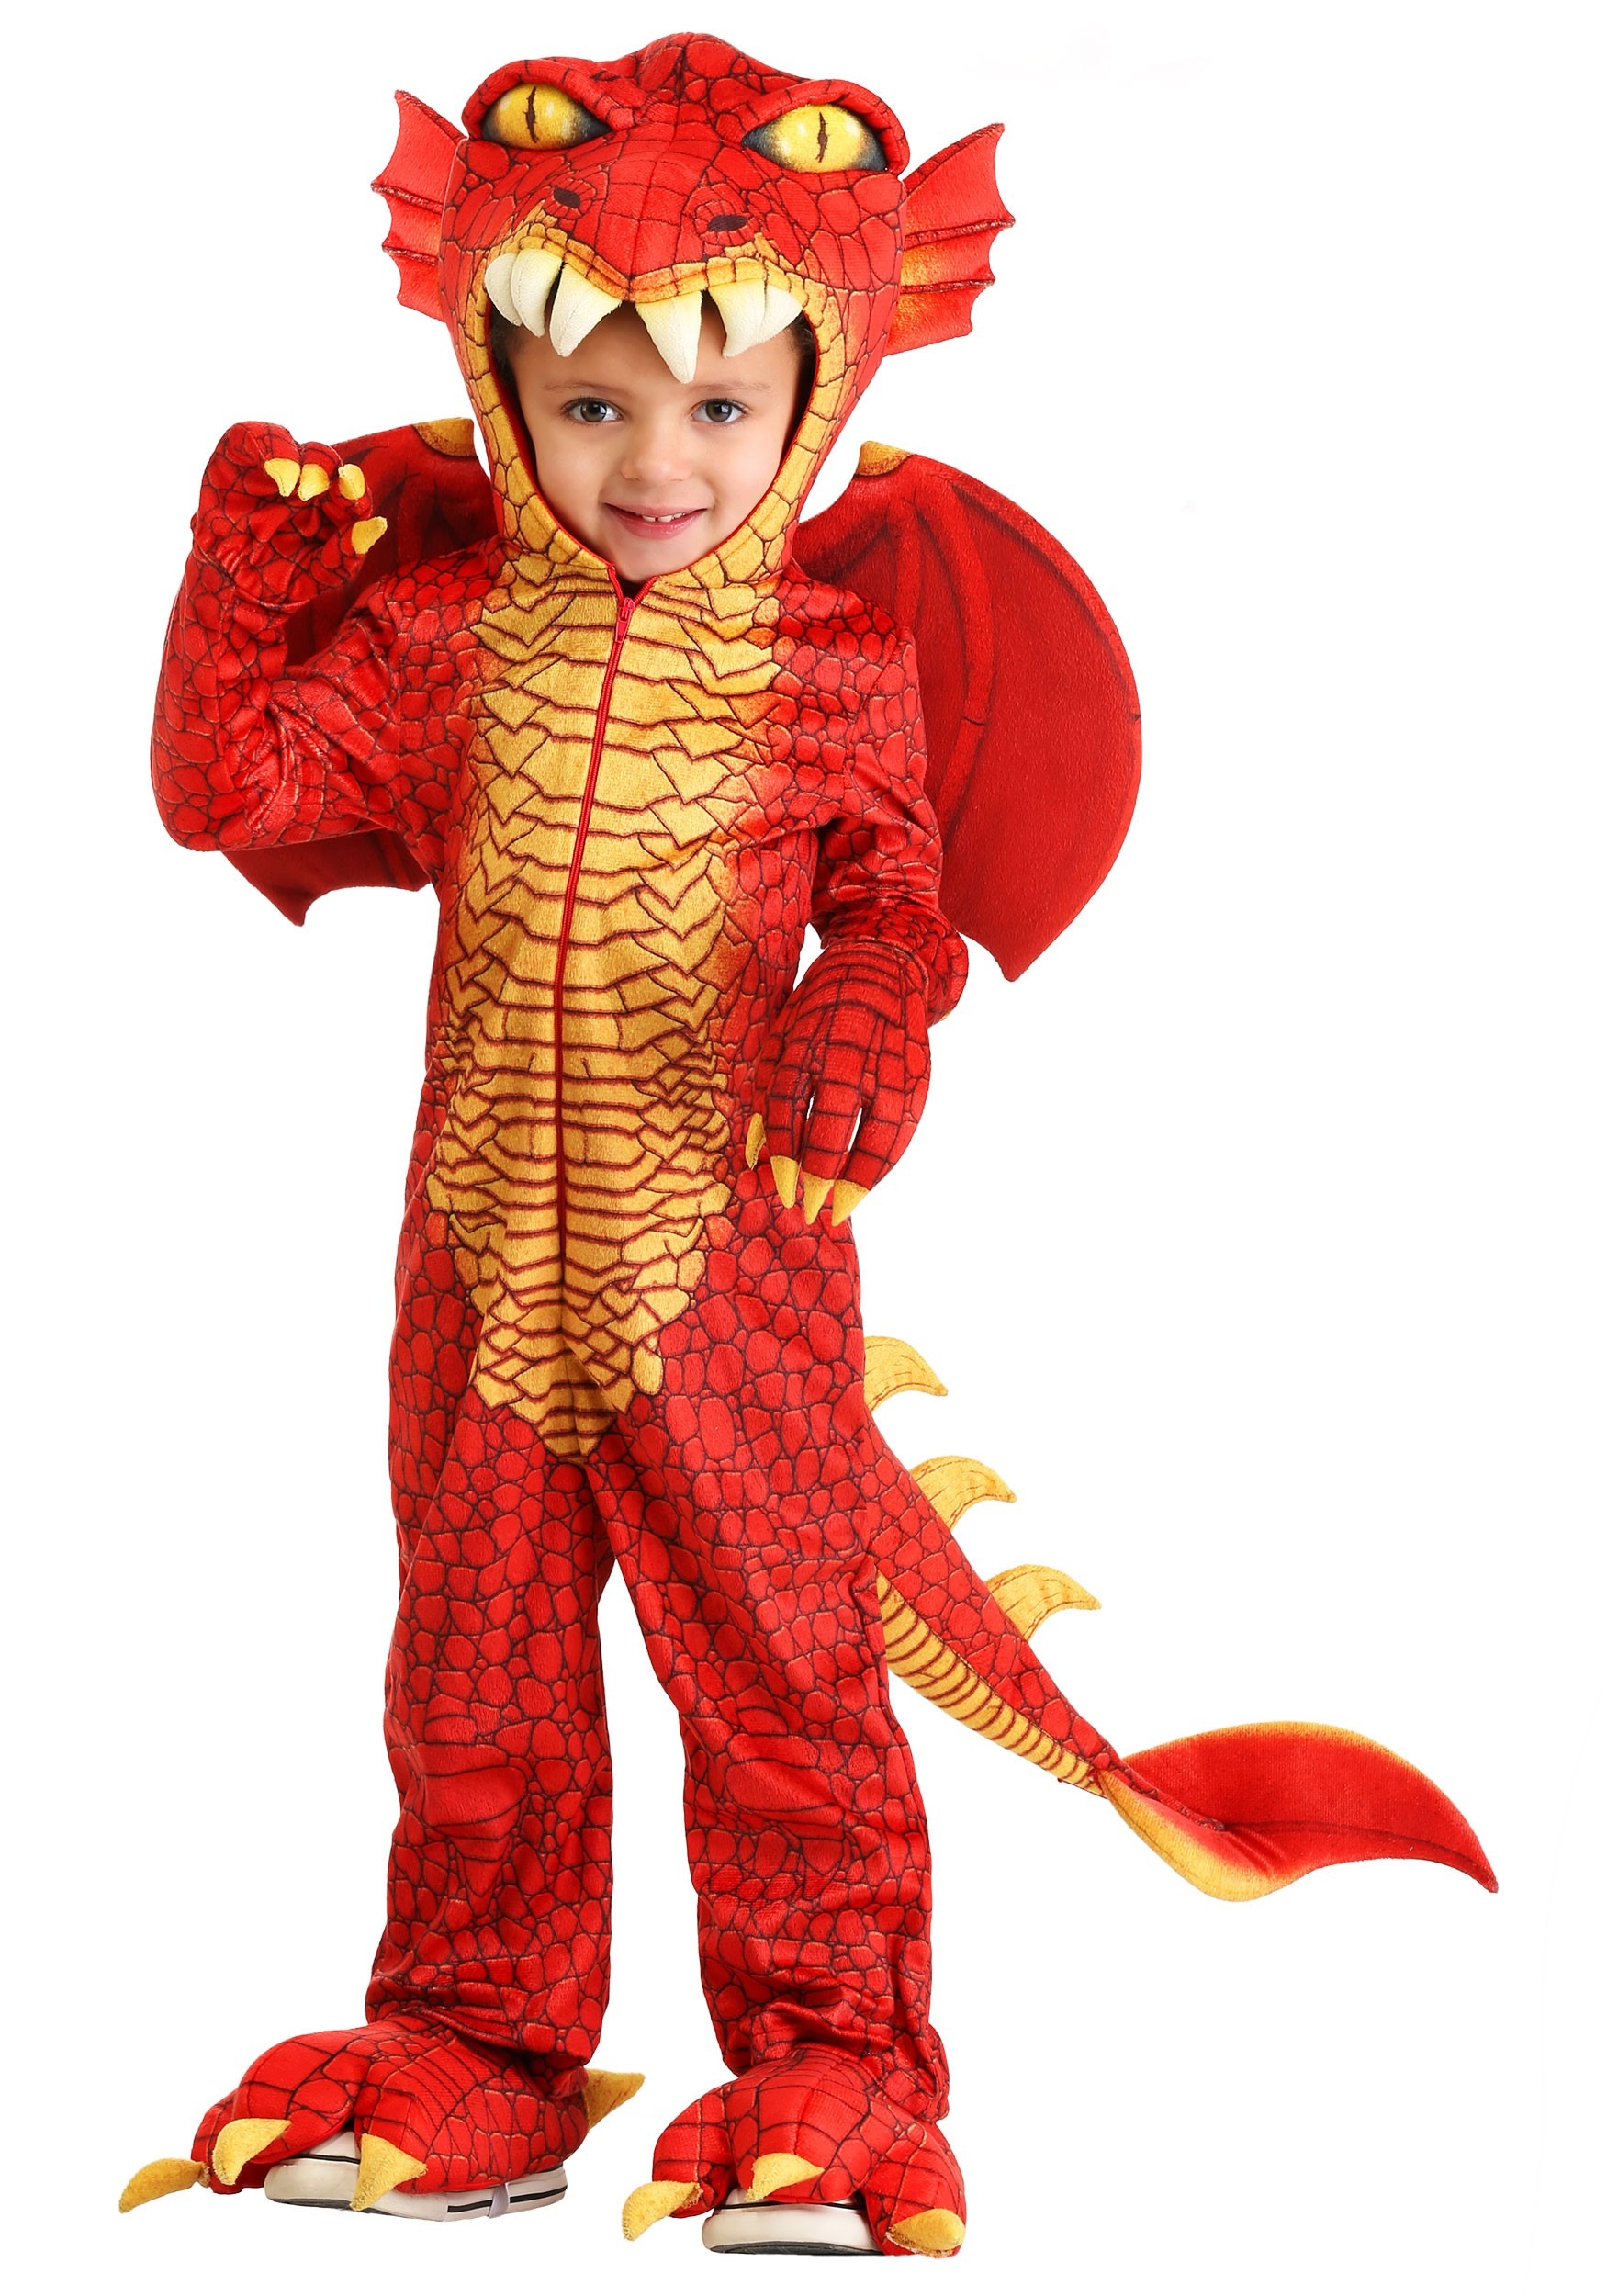 Photos - Fancy Dress Deluxe FUN Costumes  Red Dragon Costume for Toddler's Black/Orange/ 